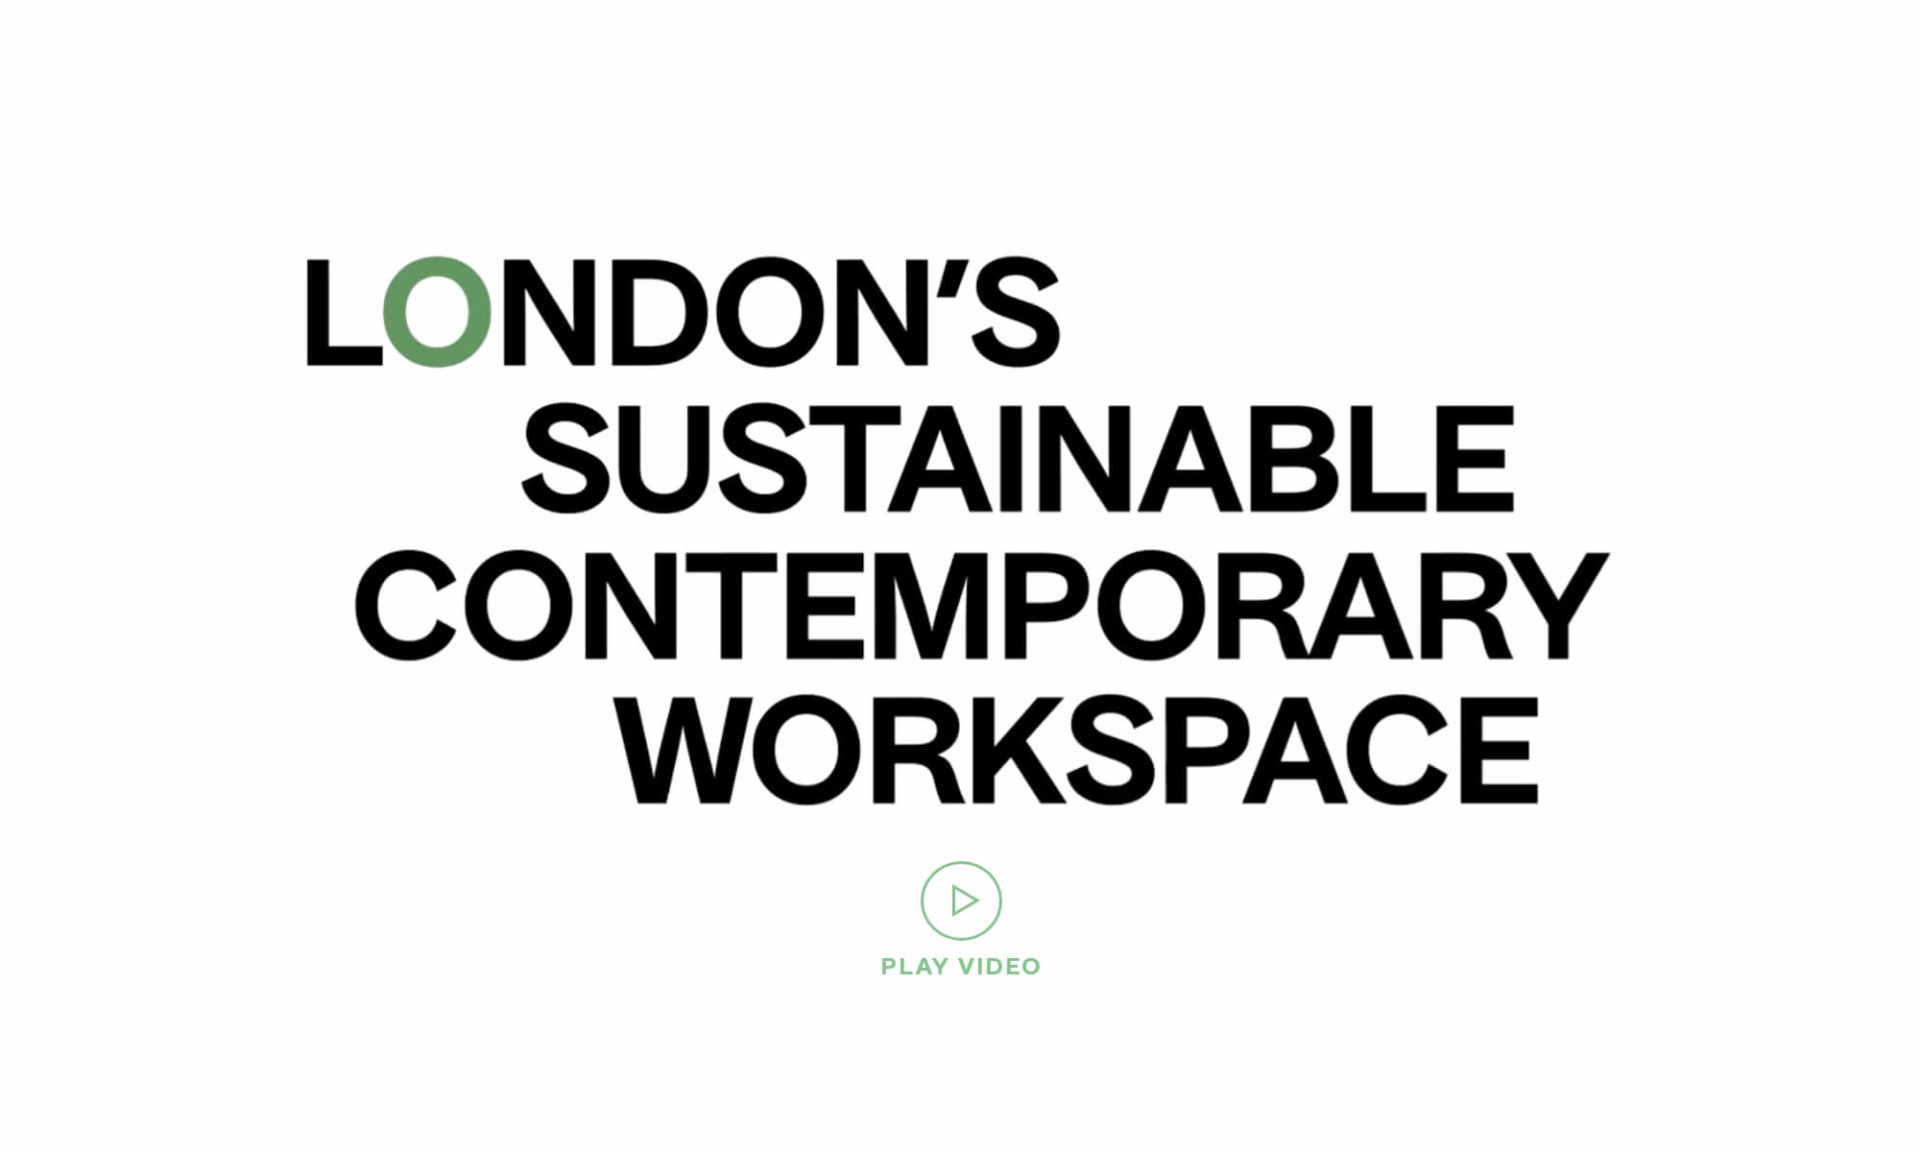 London's Sustainable Contemporary Workspace